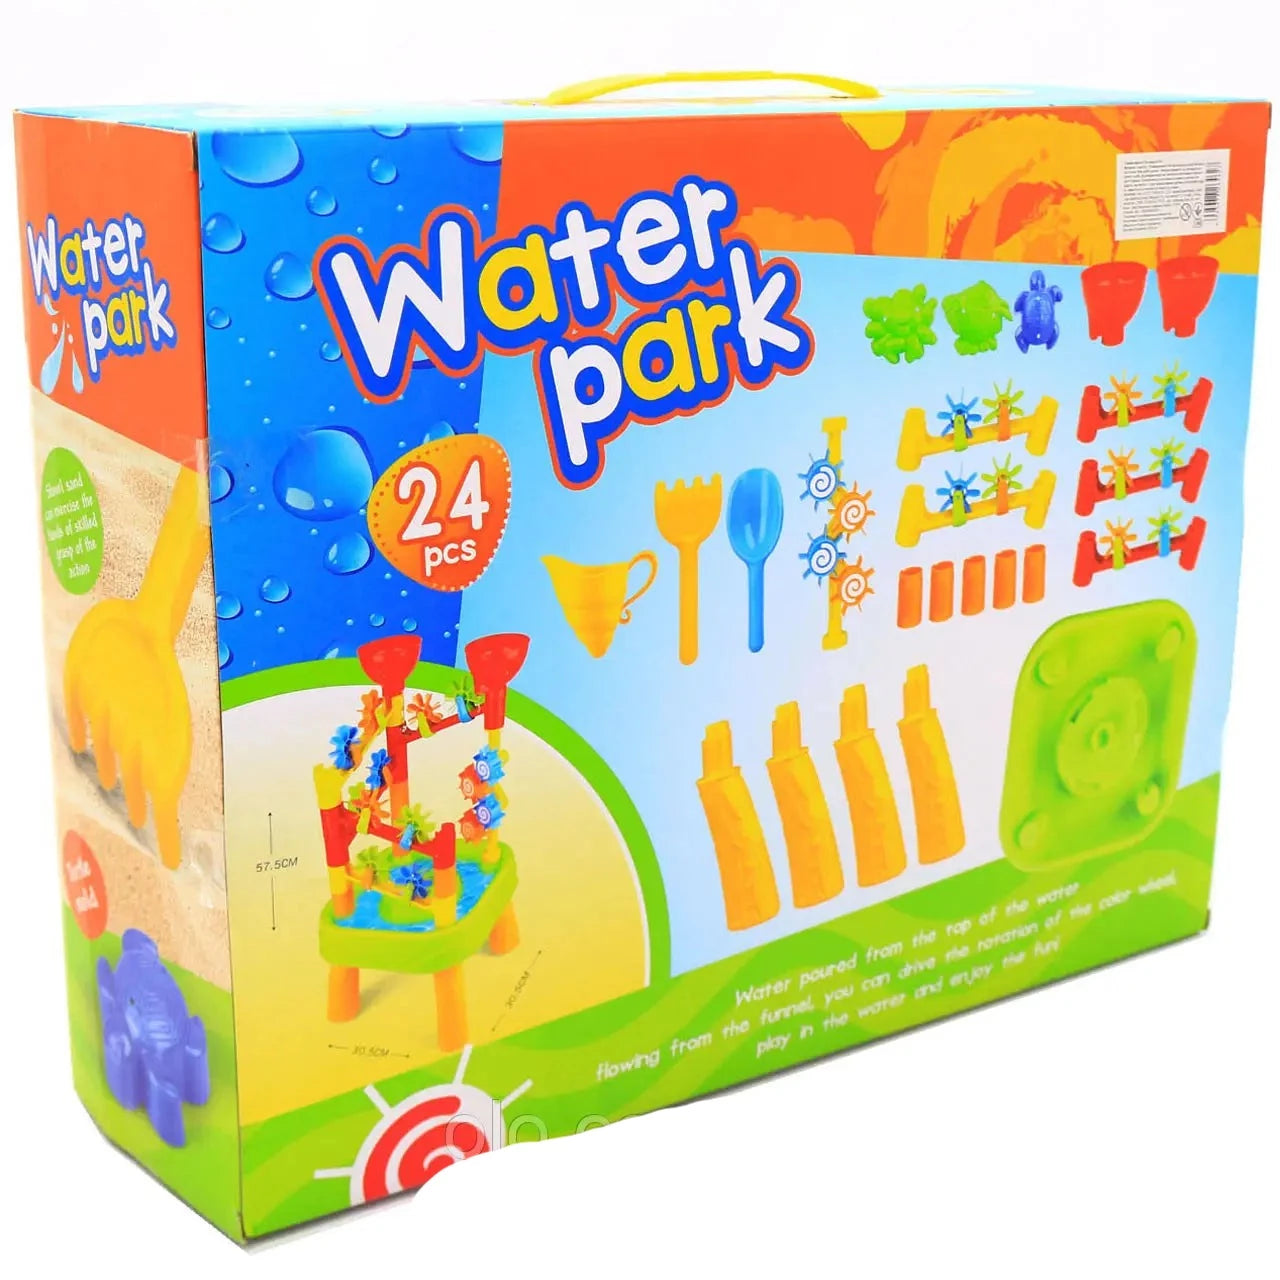 Water Park & Sand Play Activity Table-979A